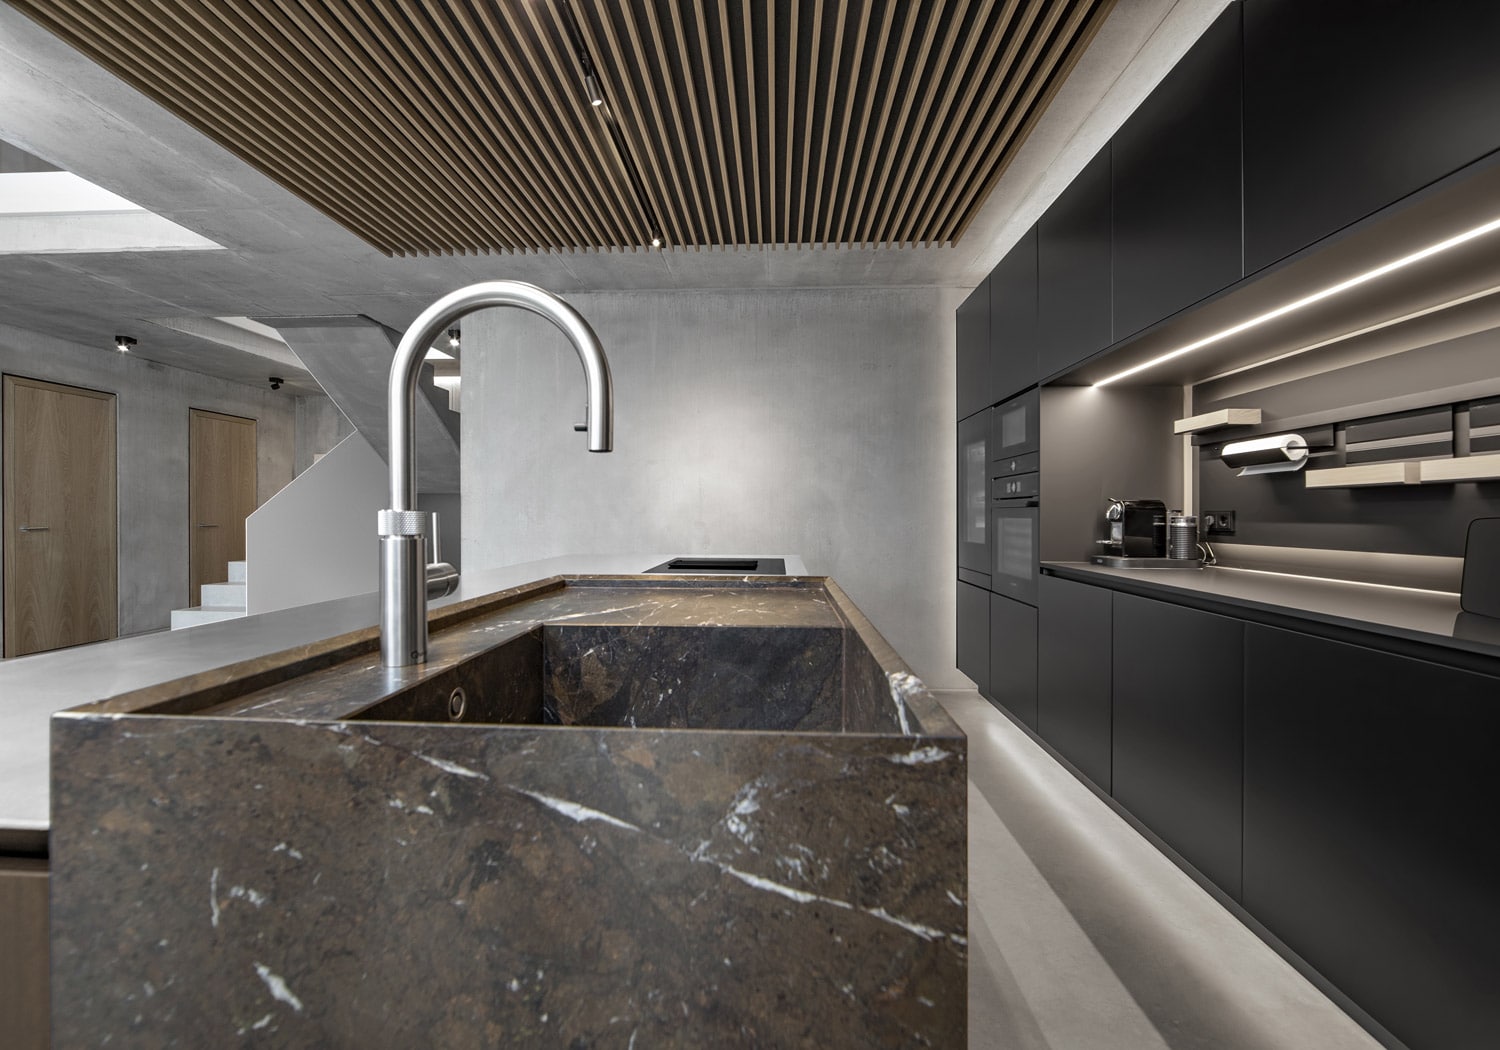 On the island, the choice of sink in Breccia Imperiale granite further highlights the project’s use of materials to define the various functional areas of the kitchen.